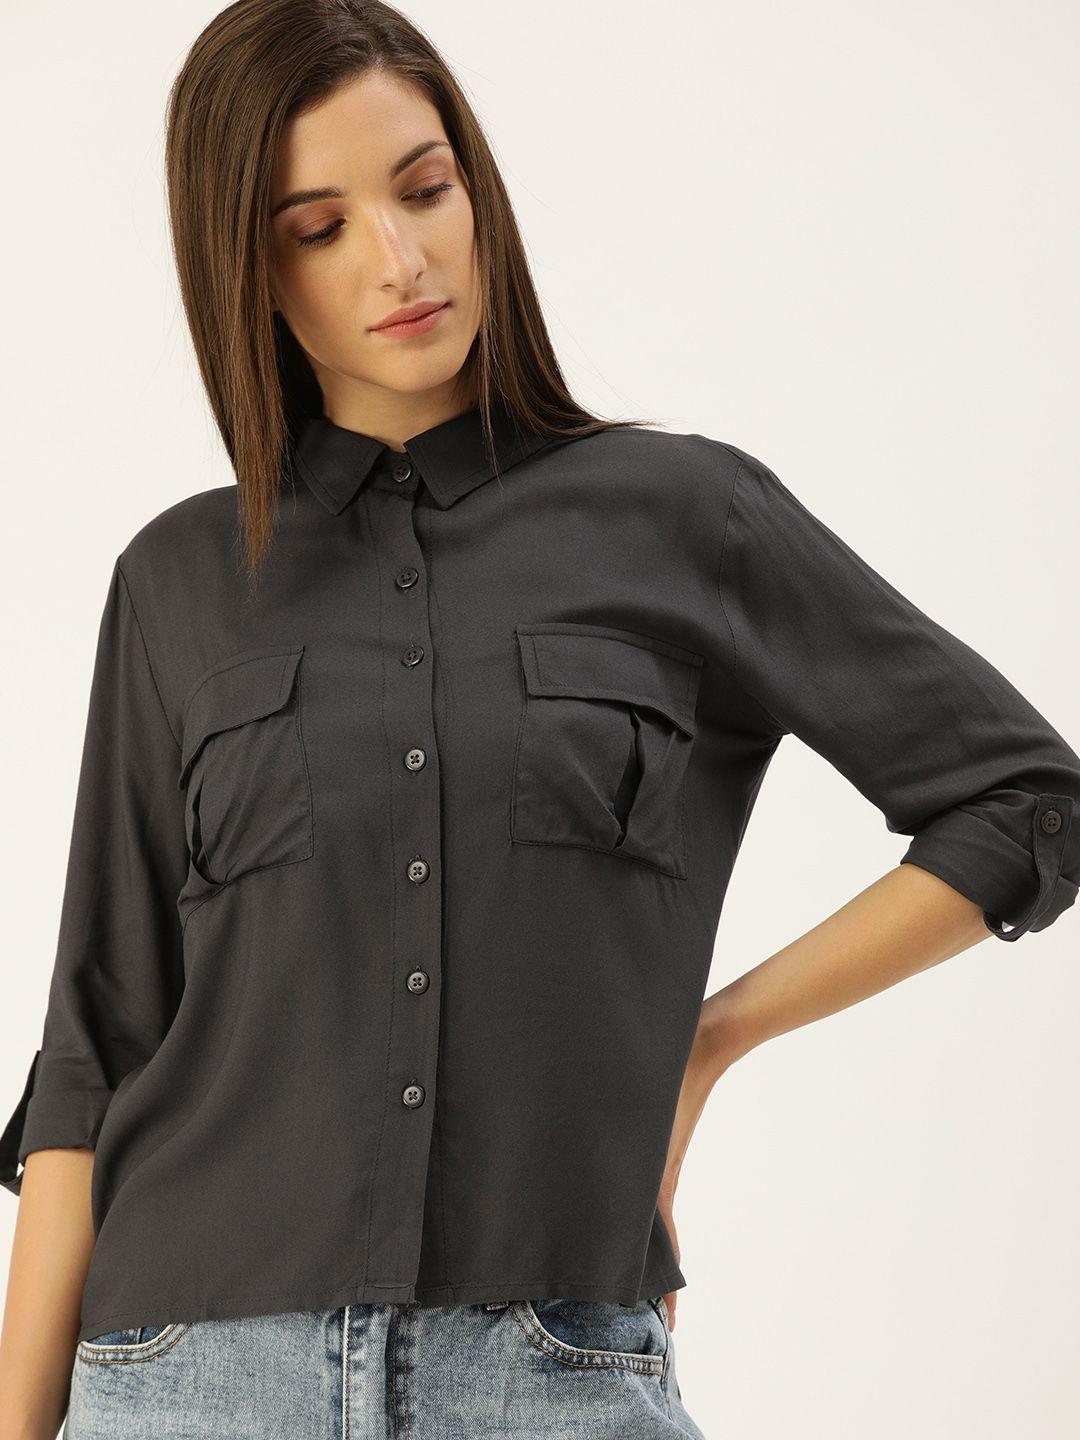 flying machine charcoal roll-up sleeves shirt style top